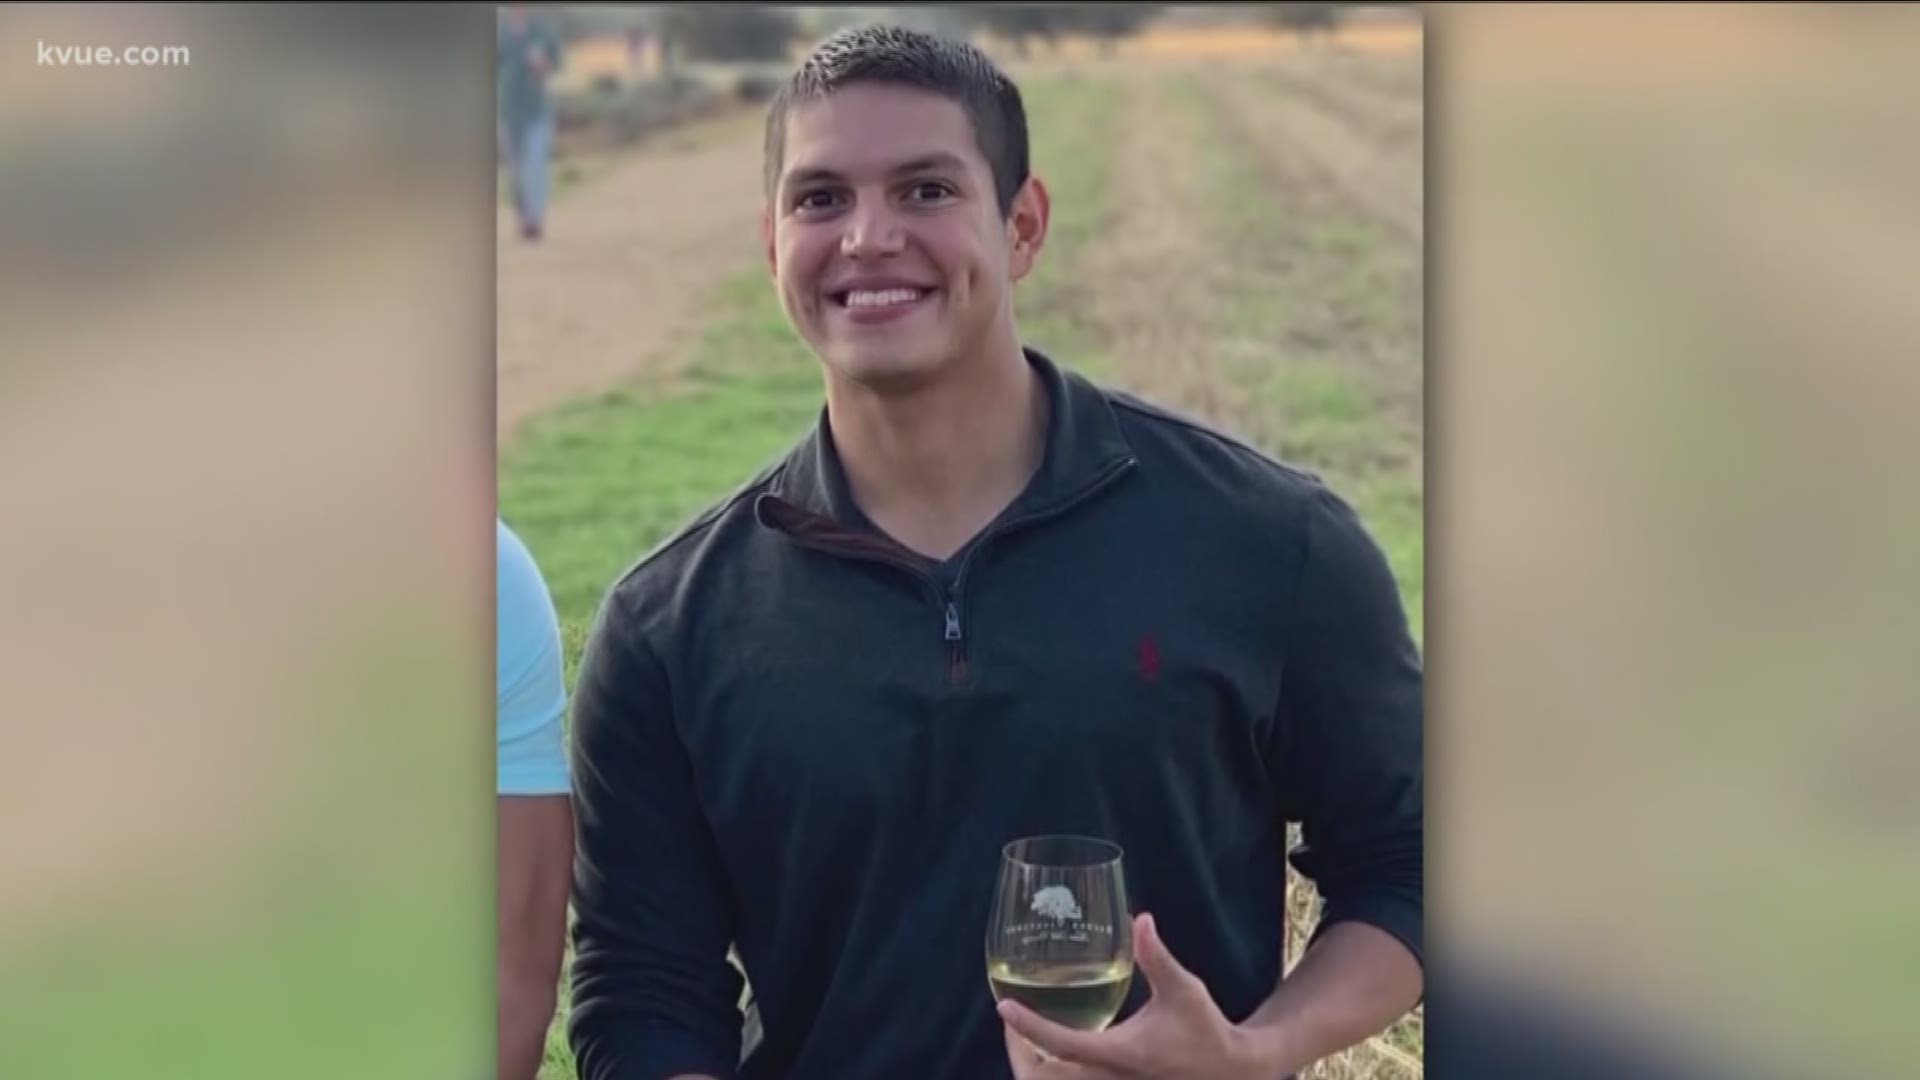 According to Austin police, Martin Gutierrez, 25, was last seen at Monday 1 a.m. on Rainey Street. They do not suspect foul play in his disappearance. 
STORY: http://www.kvue.com/news/local/austin-police-seeking-missing-man-last-seen-monday/616342946